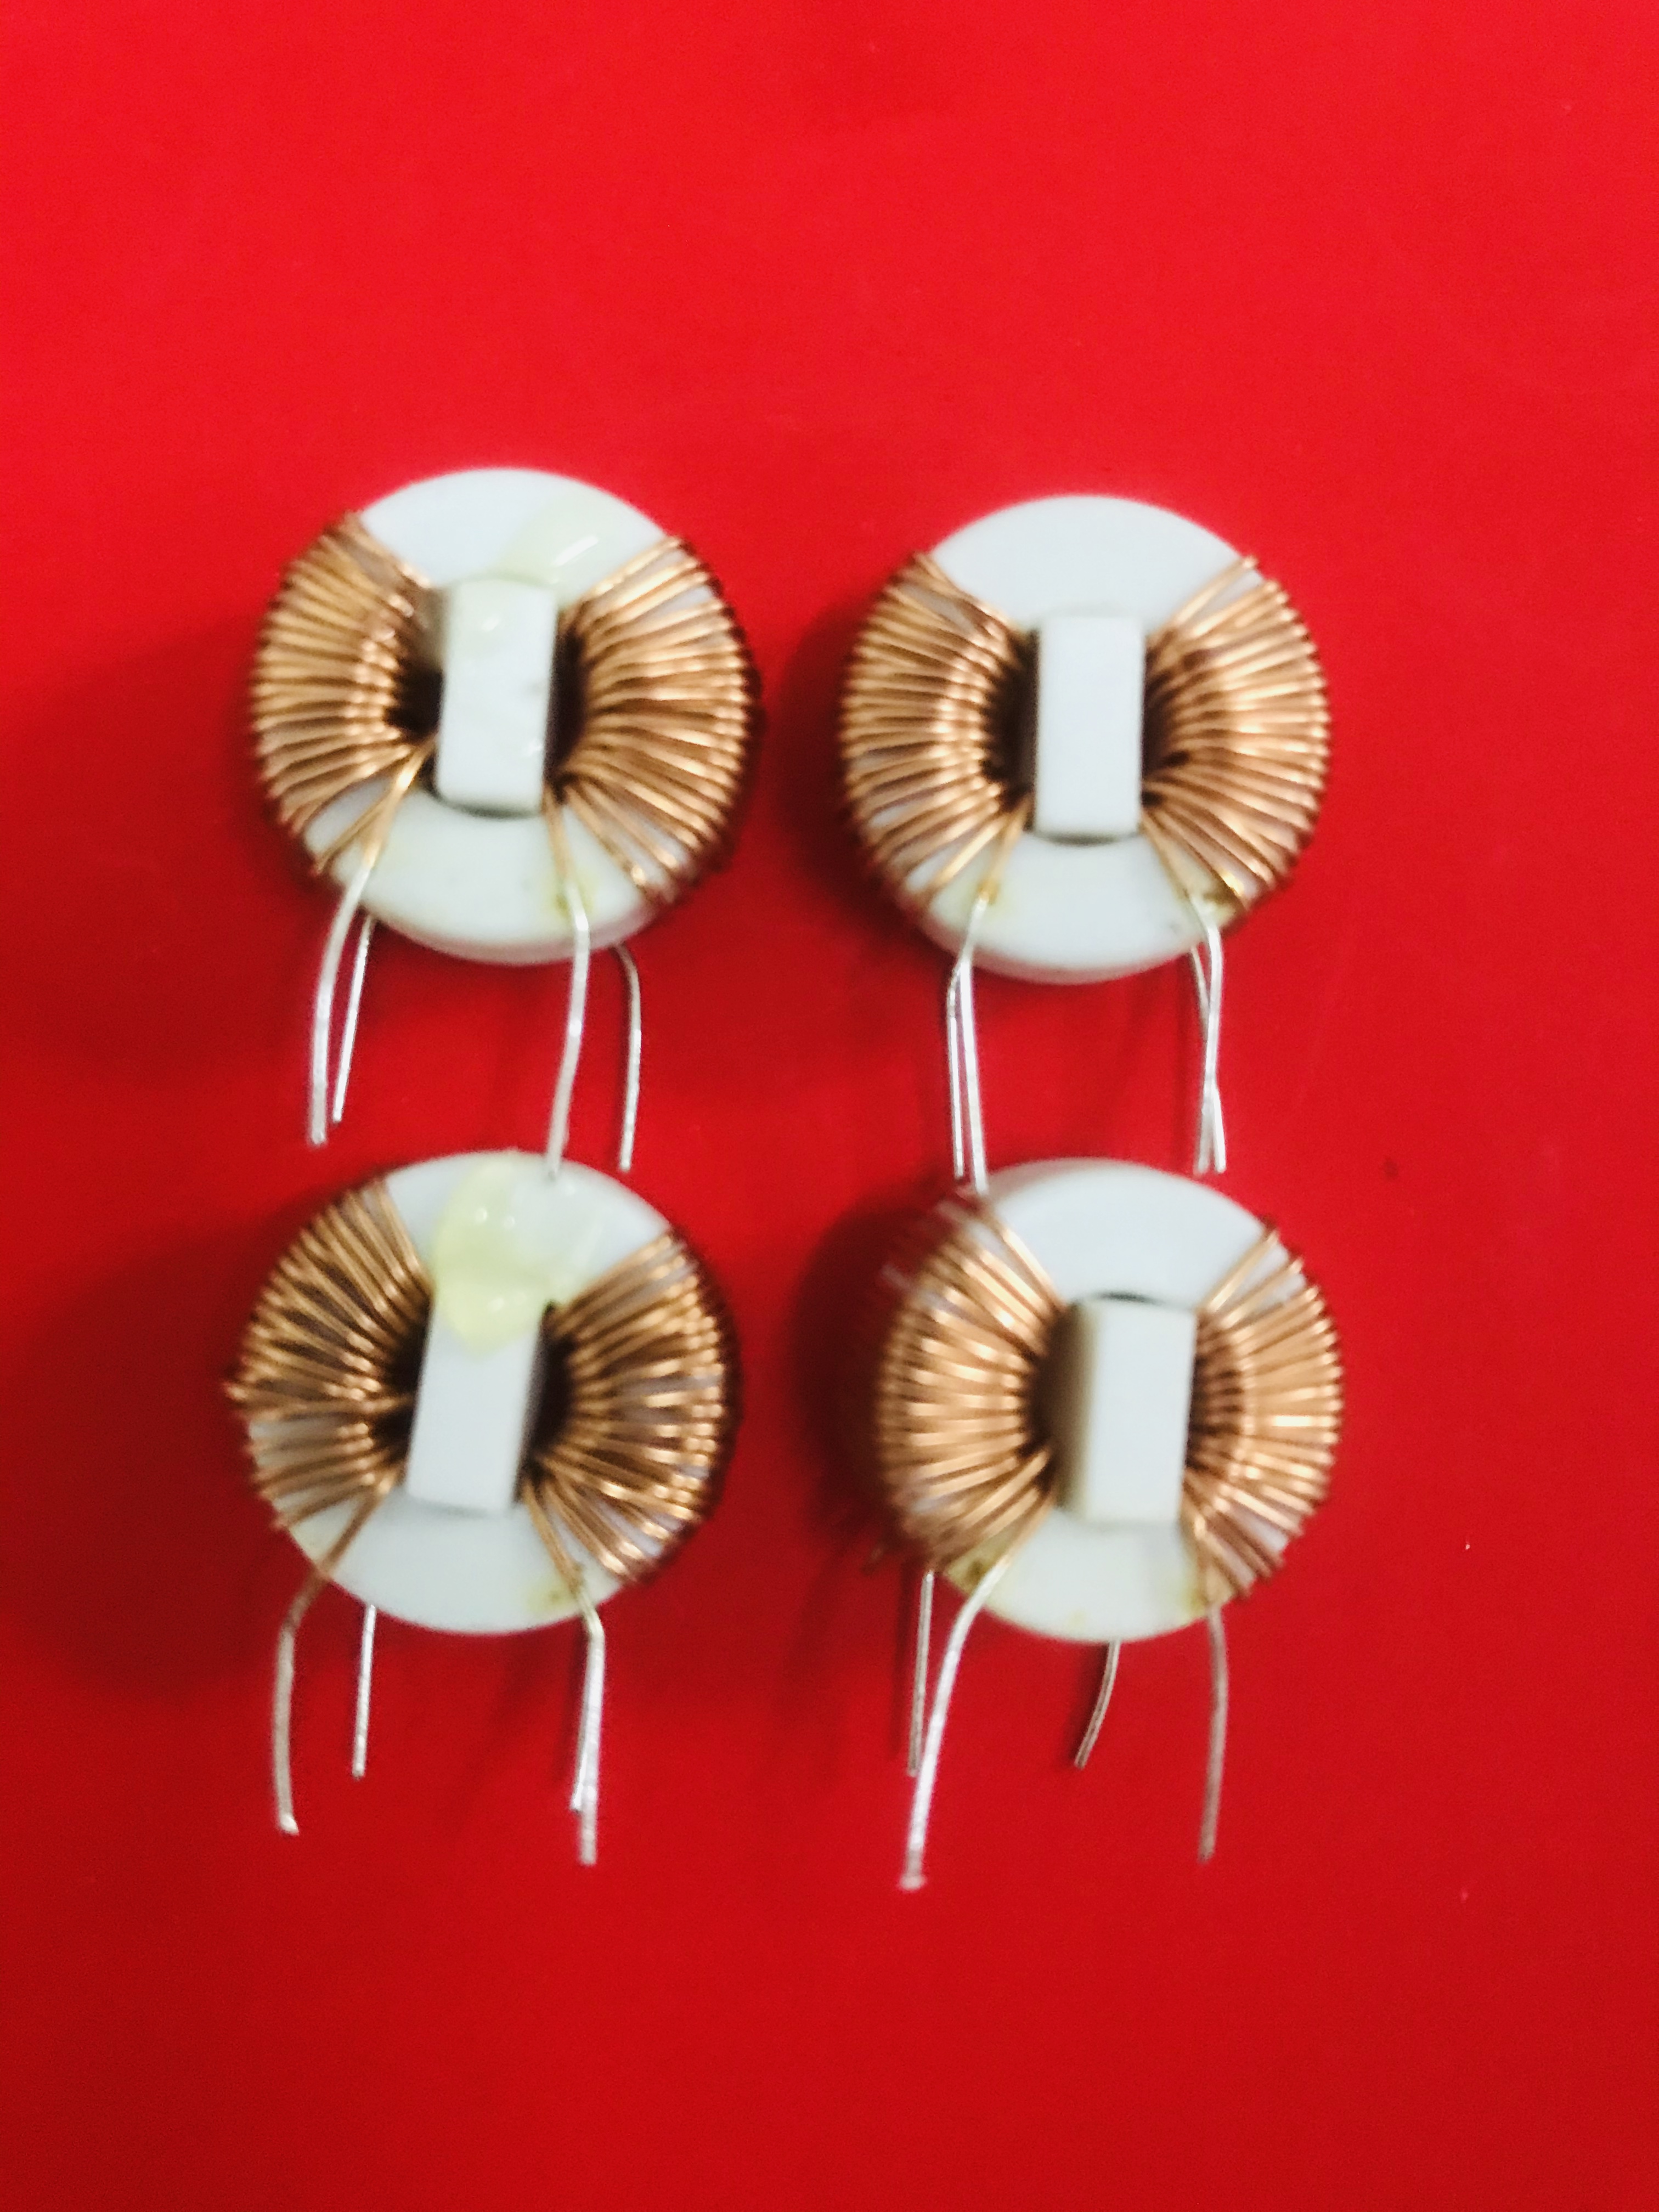 Coffee machine dry wound inductor